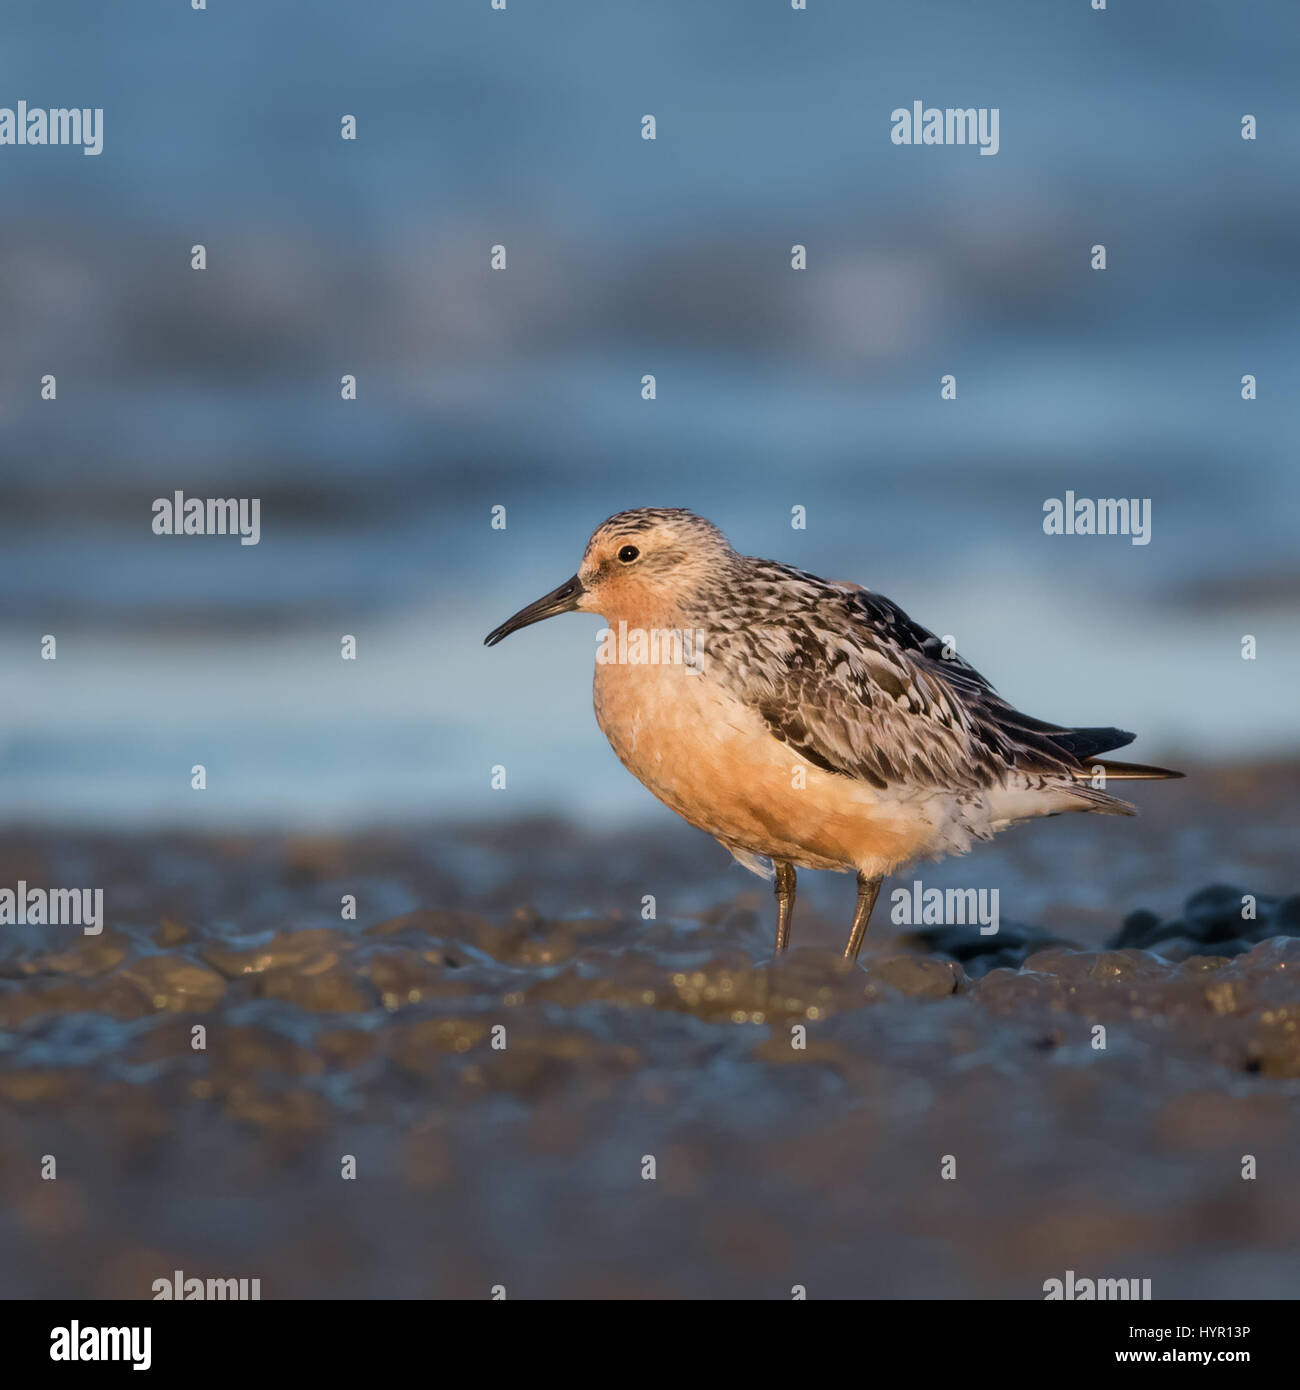 A Red Knot forages in the golden hour. This species is known for a famous migration from South America to the Arctic. Stock Photo